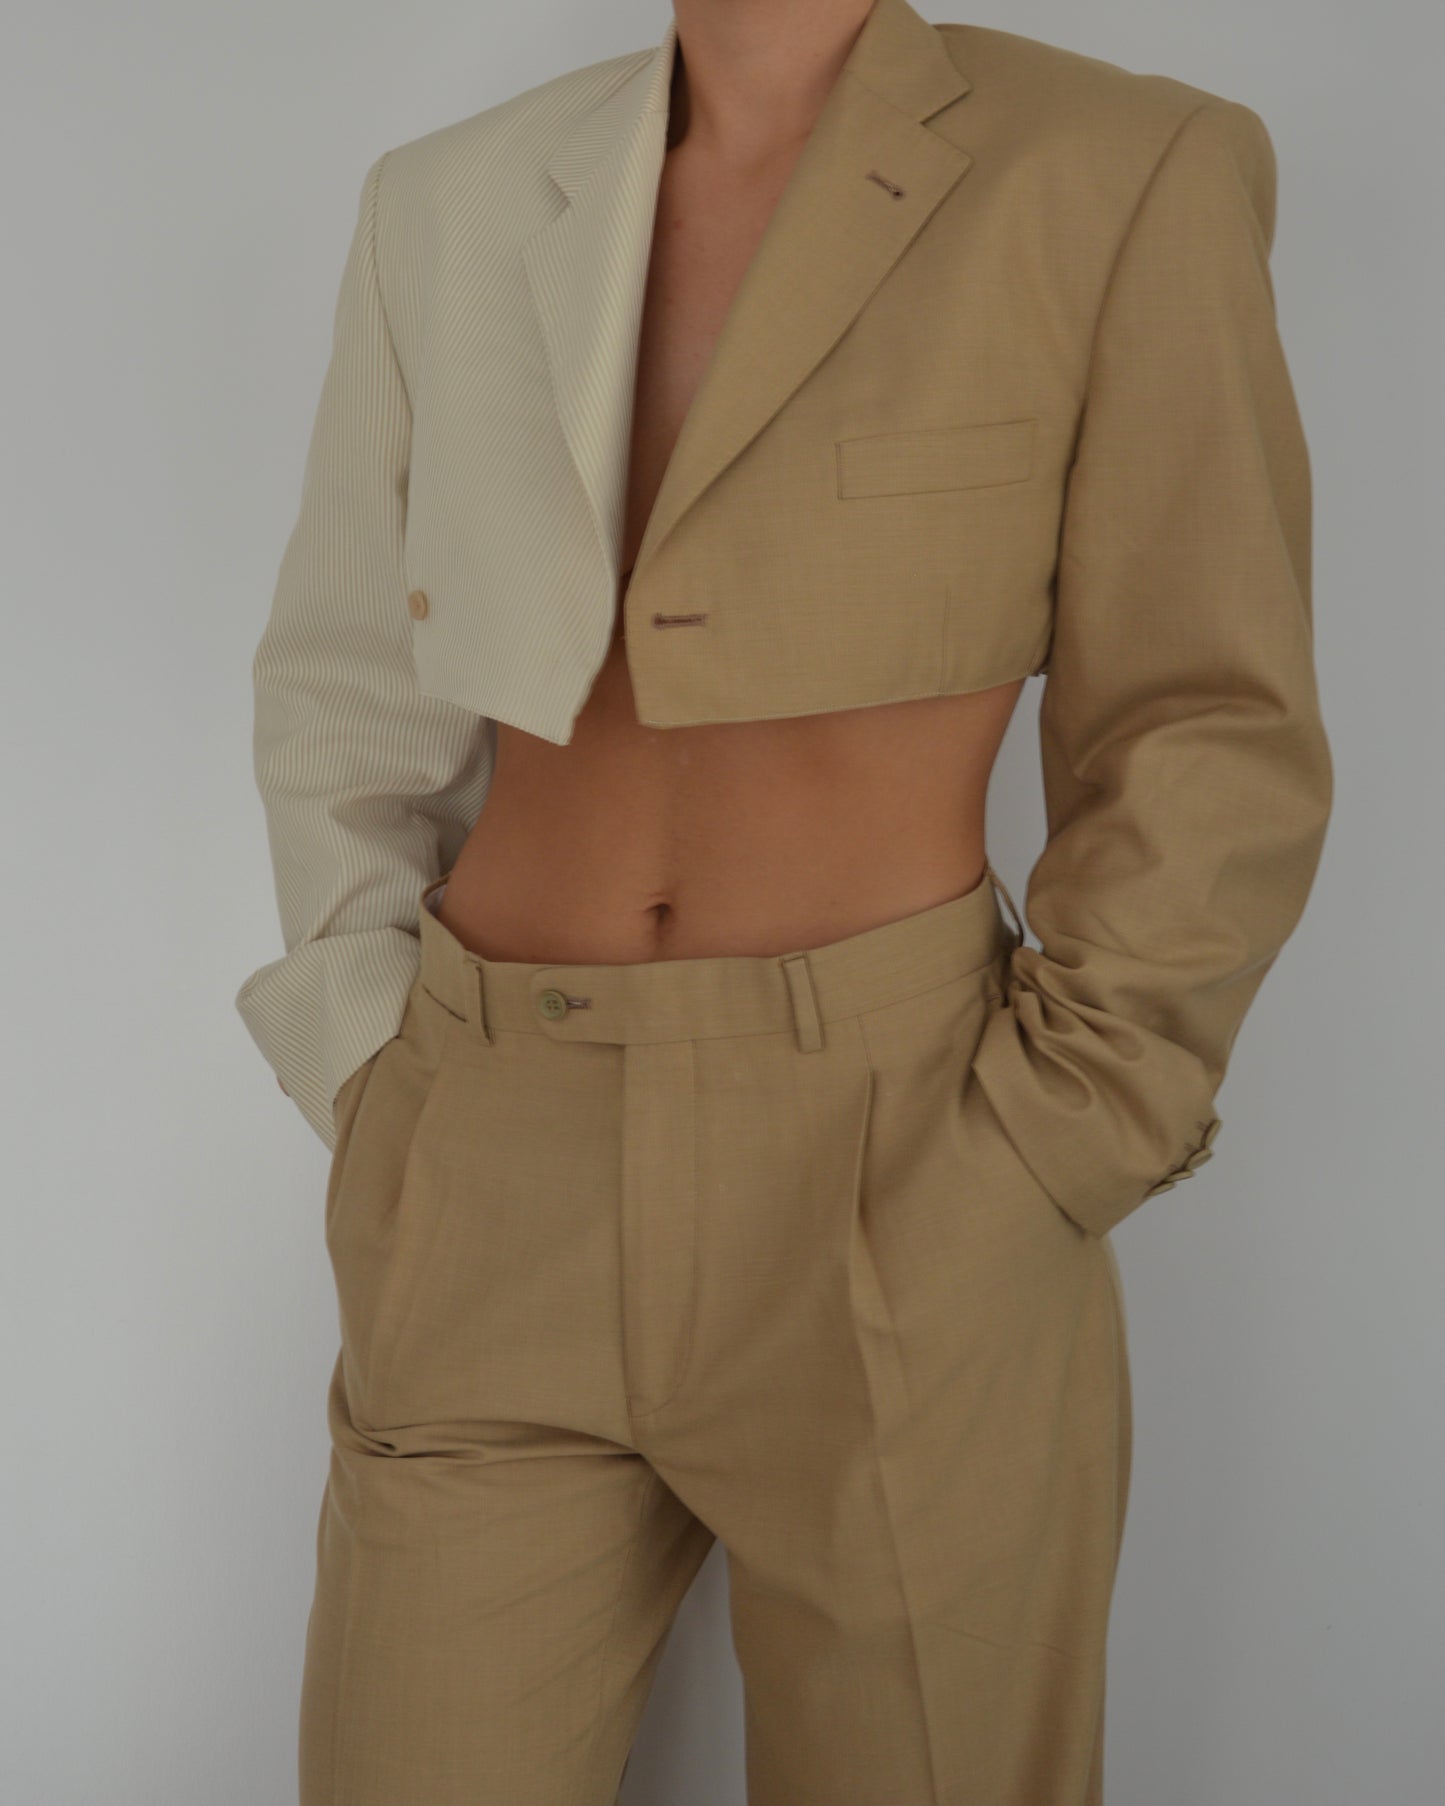 Vegan Blaset with trousers - double oatmeal (S/M)